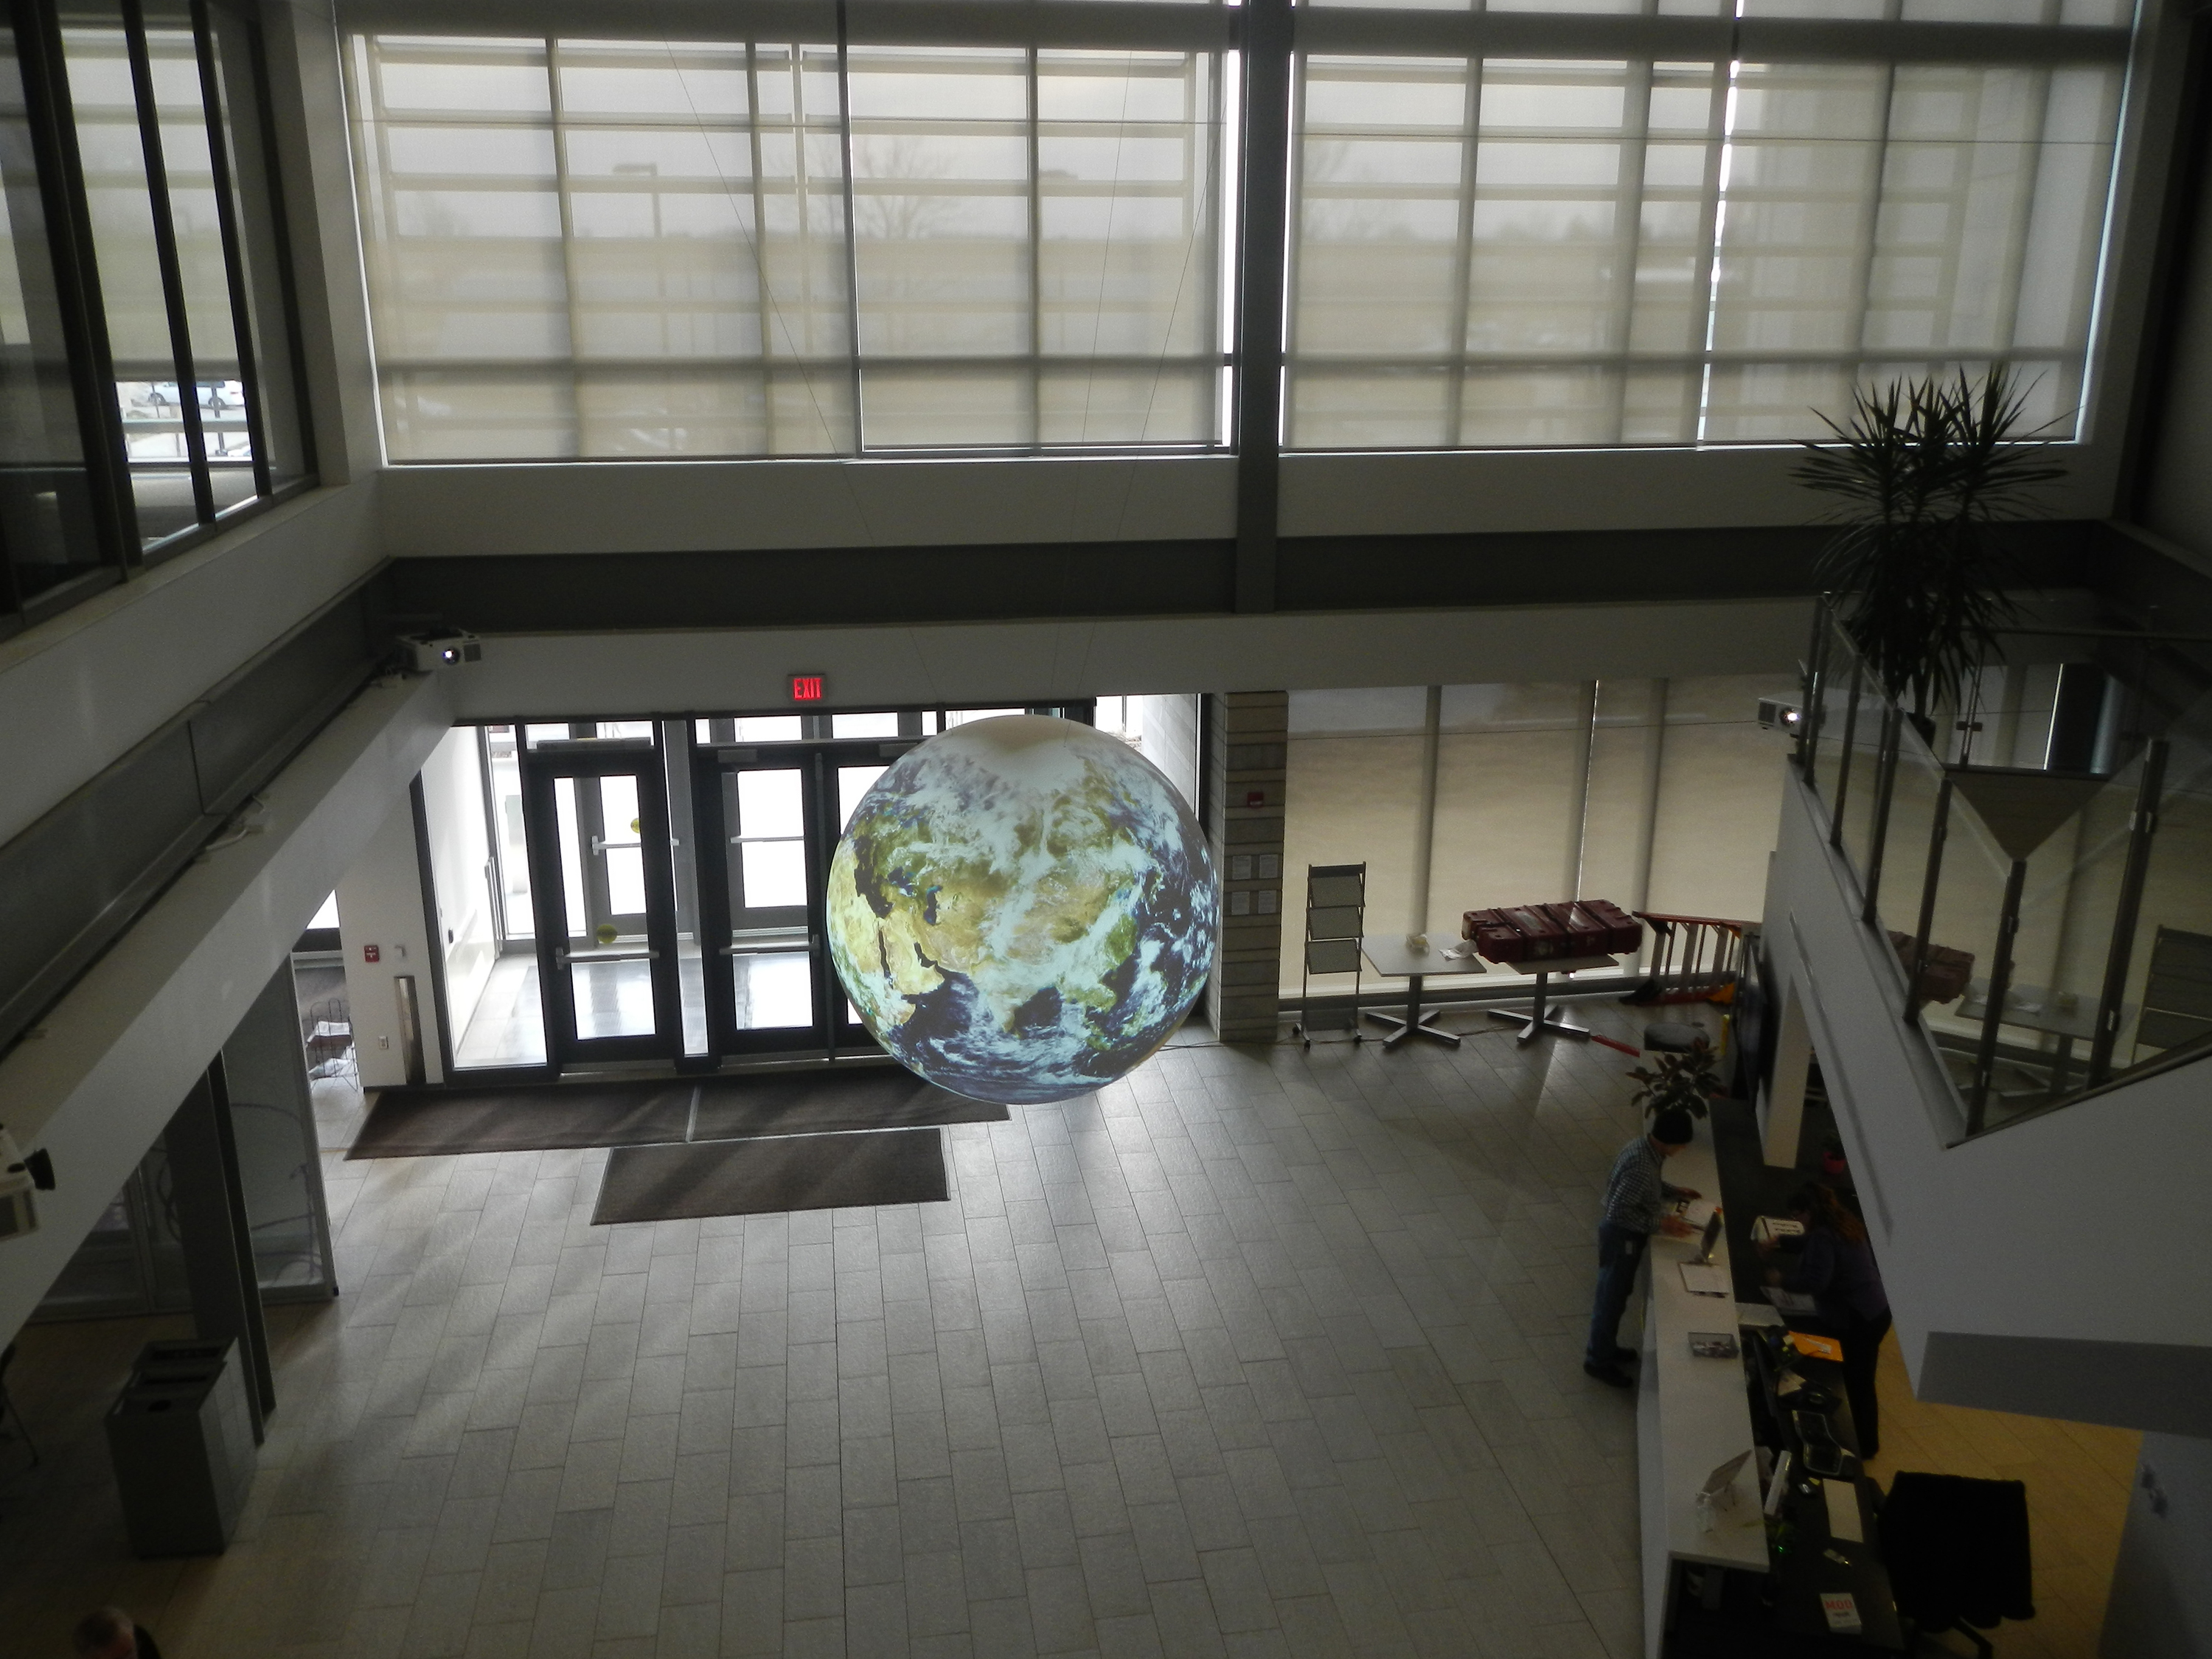 The camera looks down from a second floor balcony to Science On a Sphere hanging in a lobby